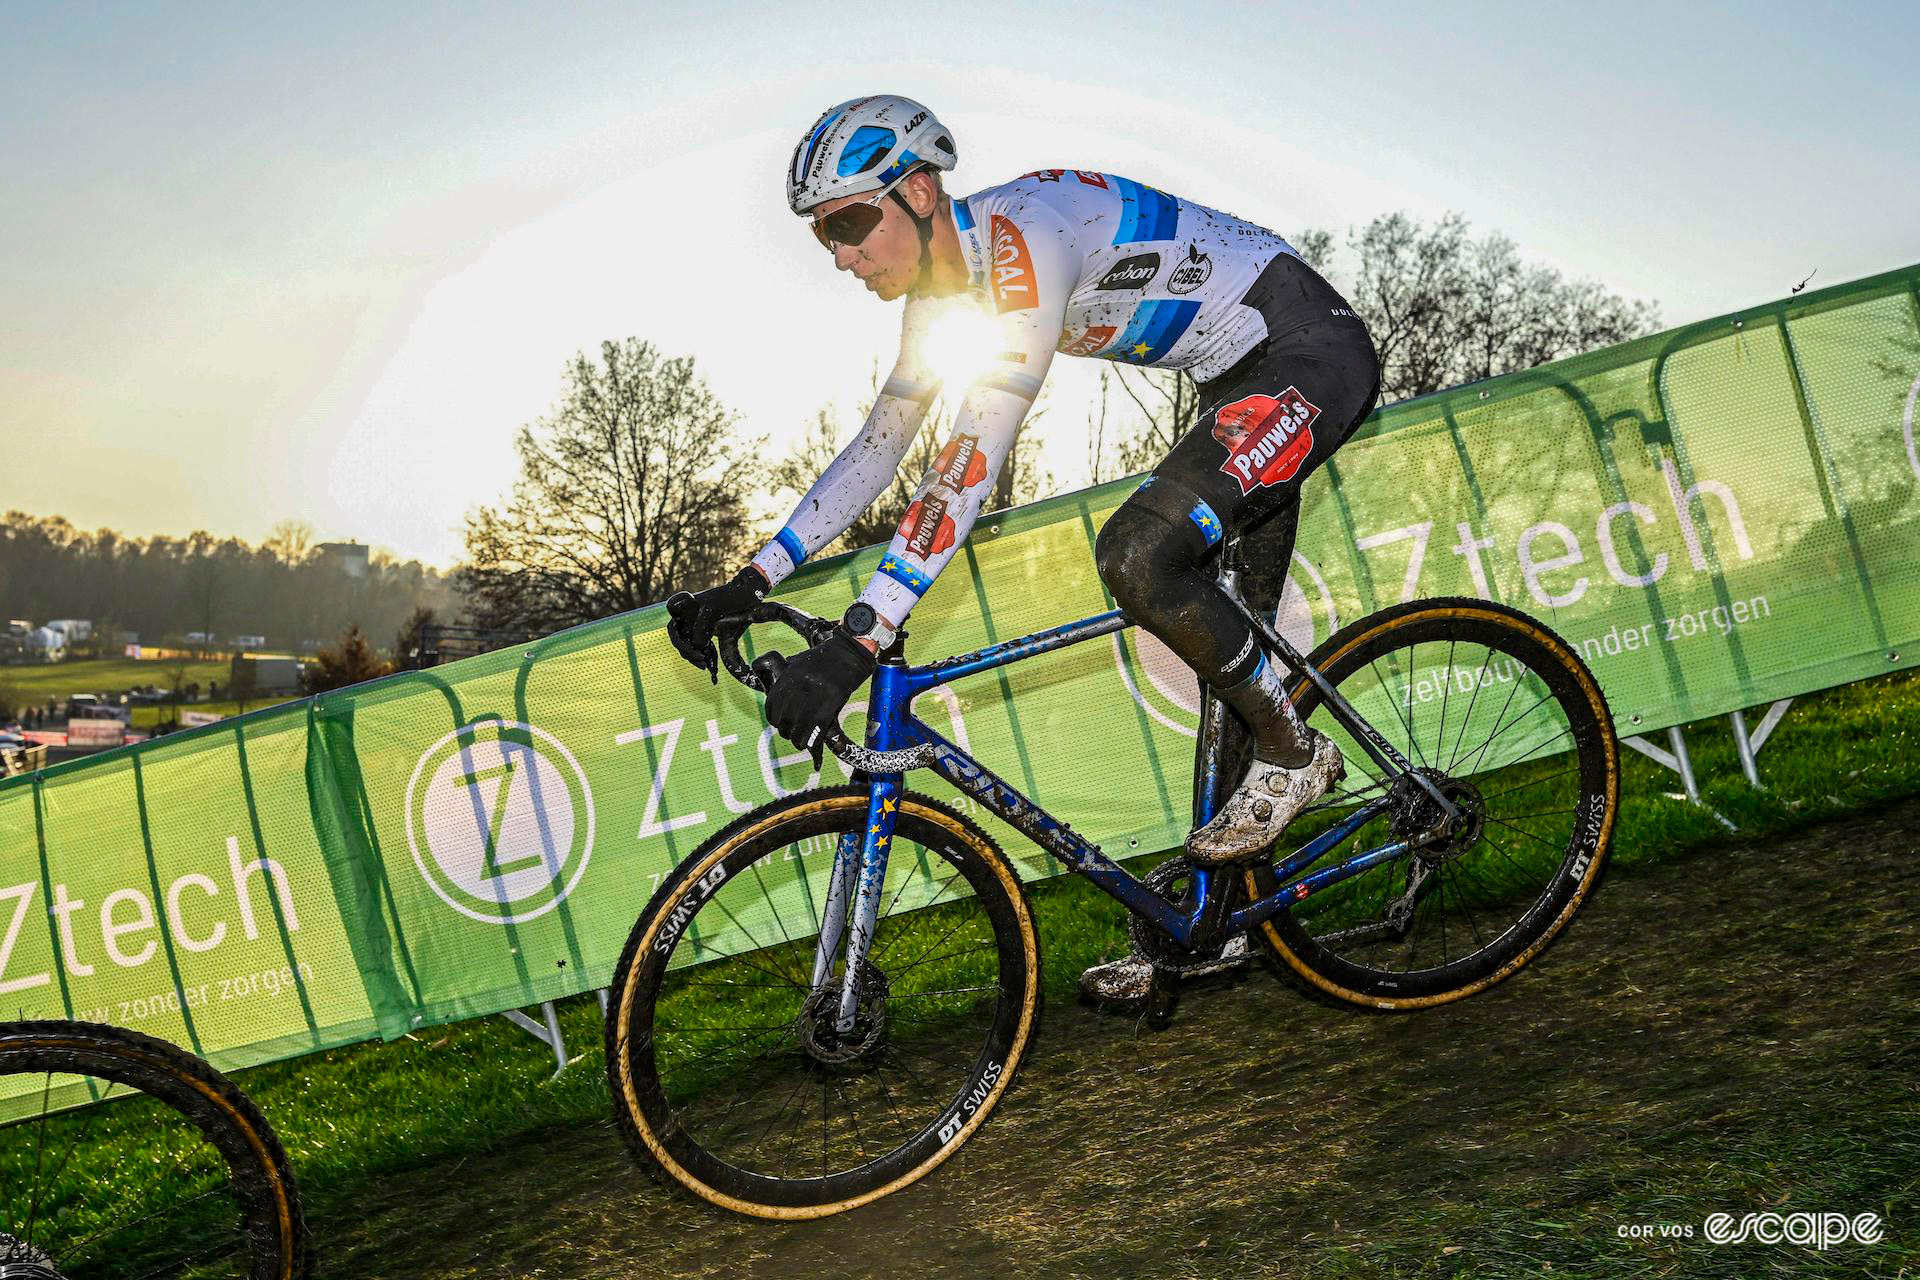 European champion Michael Vanthourenhout rides a grassy descent during Superprestige Boom, backlit by the low sun that's appearing under his arm.